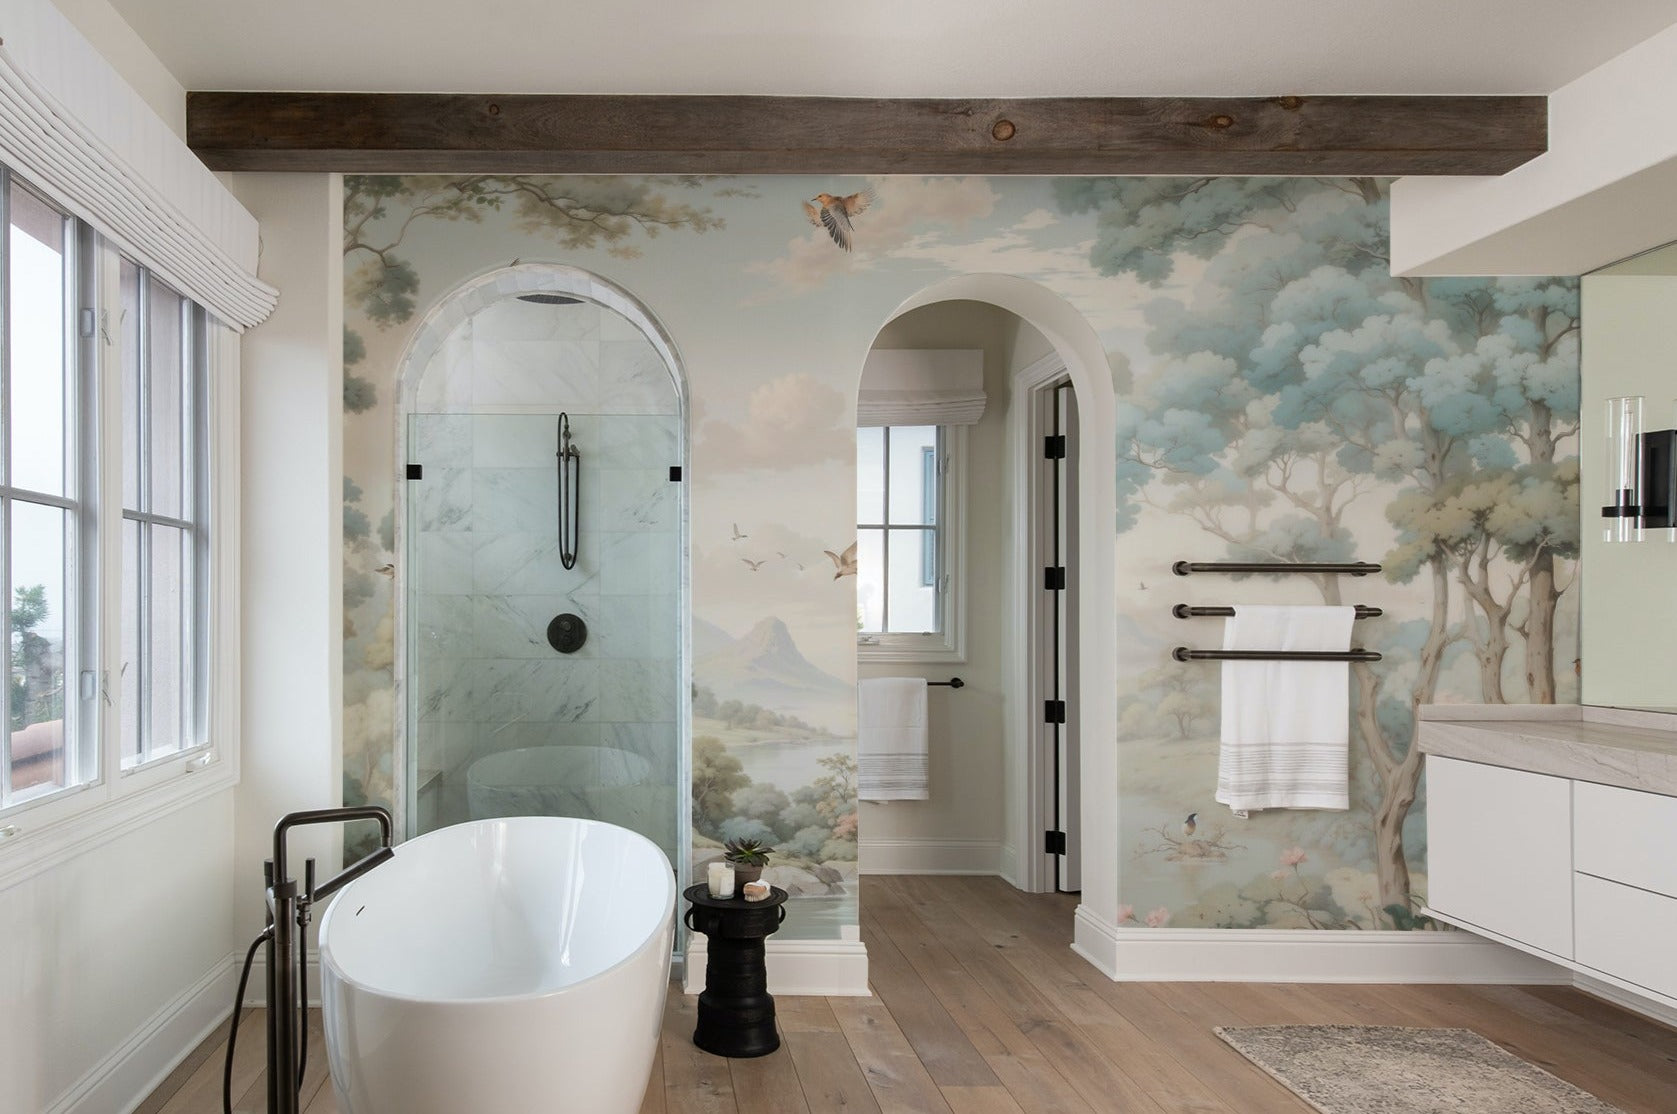 Modern bathroom enhanced with a Loire Valley landscape mural, featuring a freestanding bathtub and tranquil nature scenes."